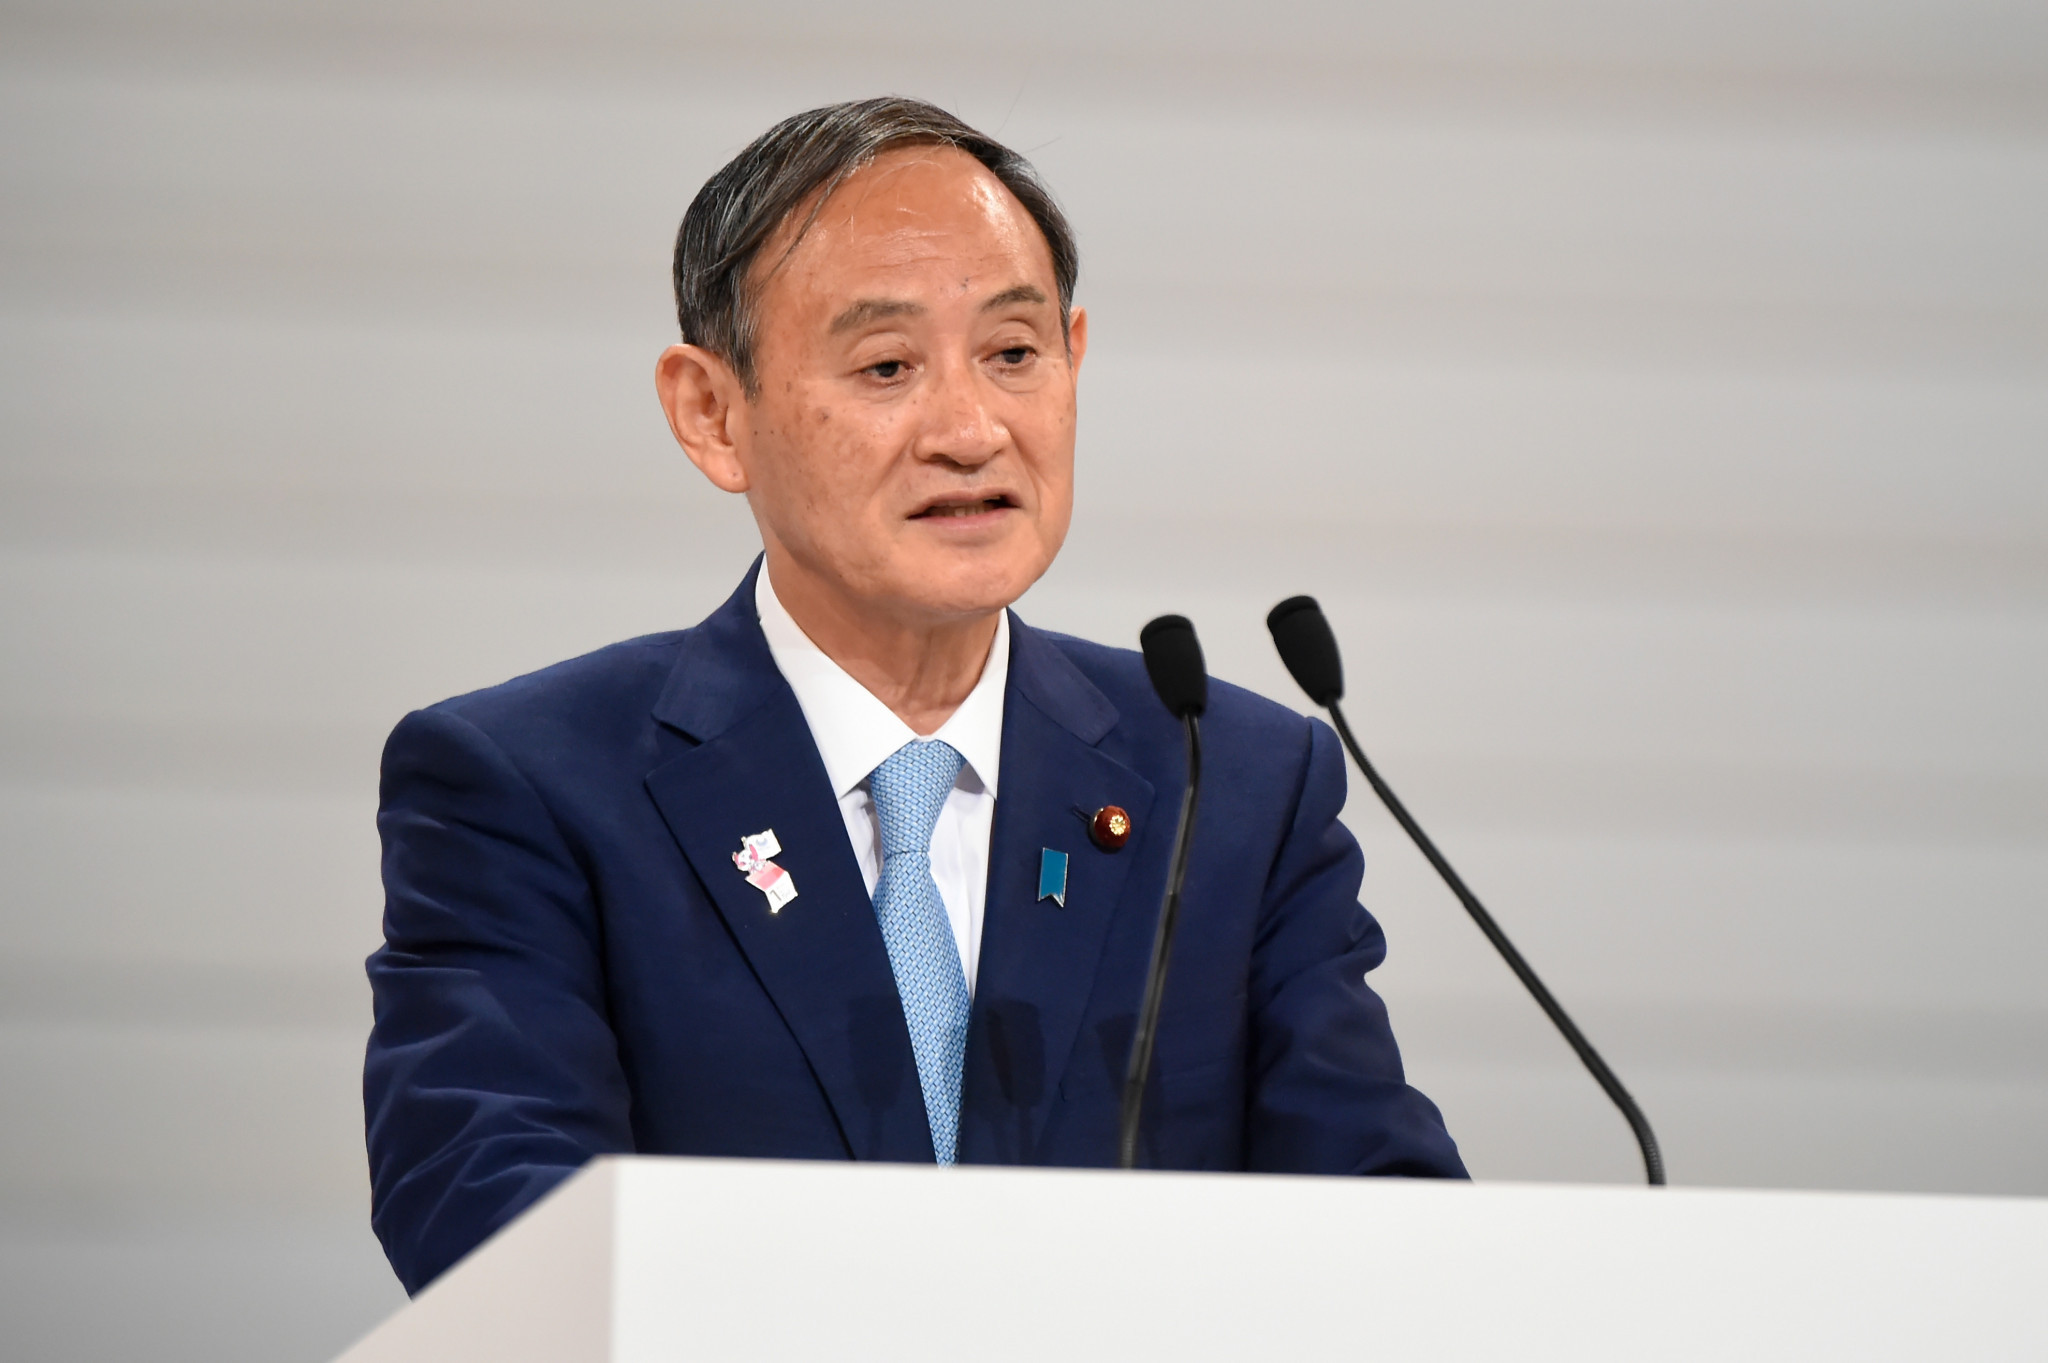 Japan's Chief Cabinet Secretary Yoshihide Suga is considered the frontrunner to become Japanese Prime Minister ©Getty Images